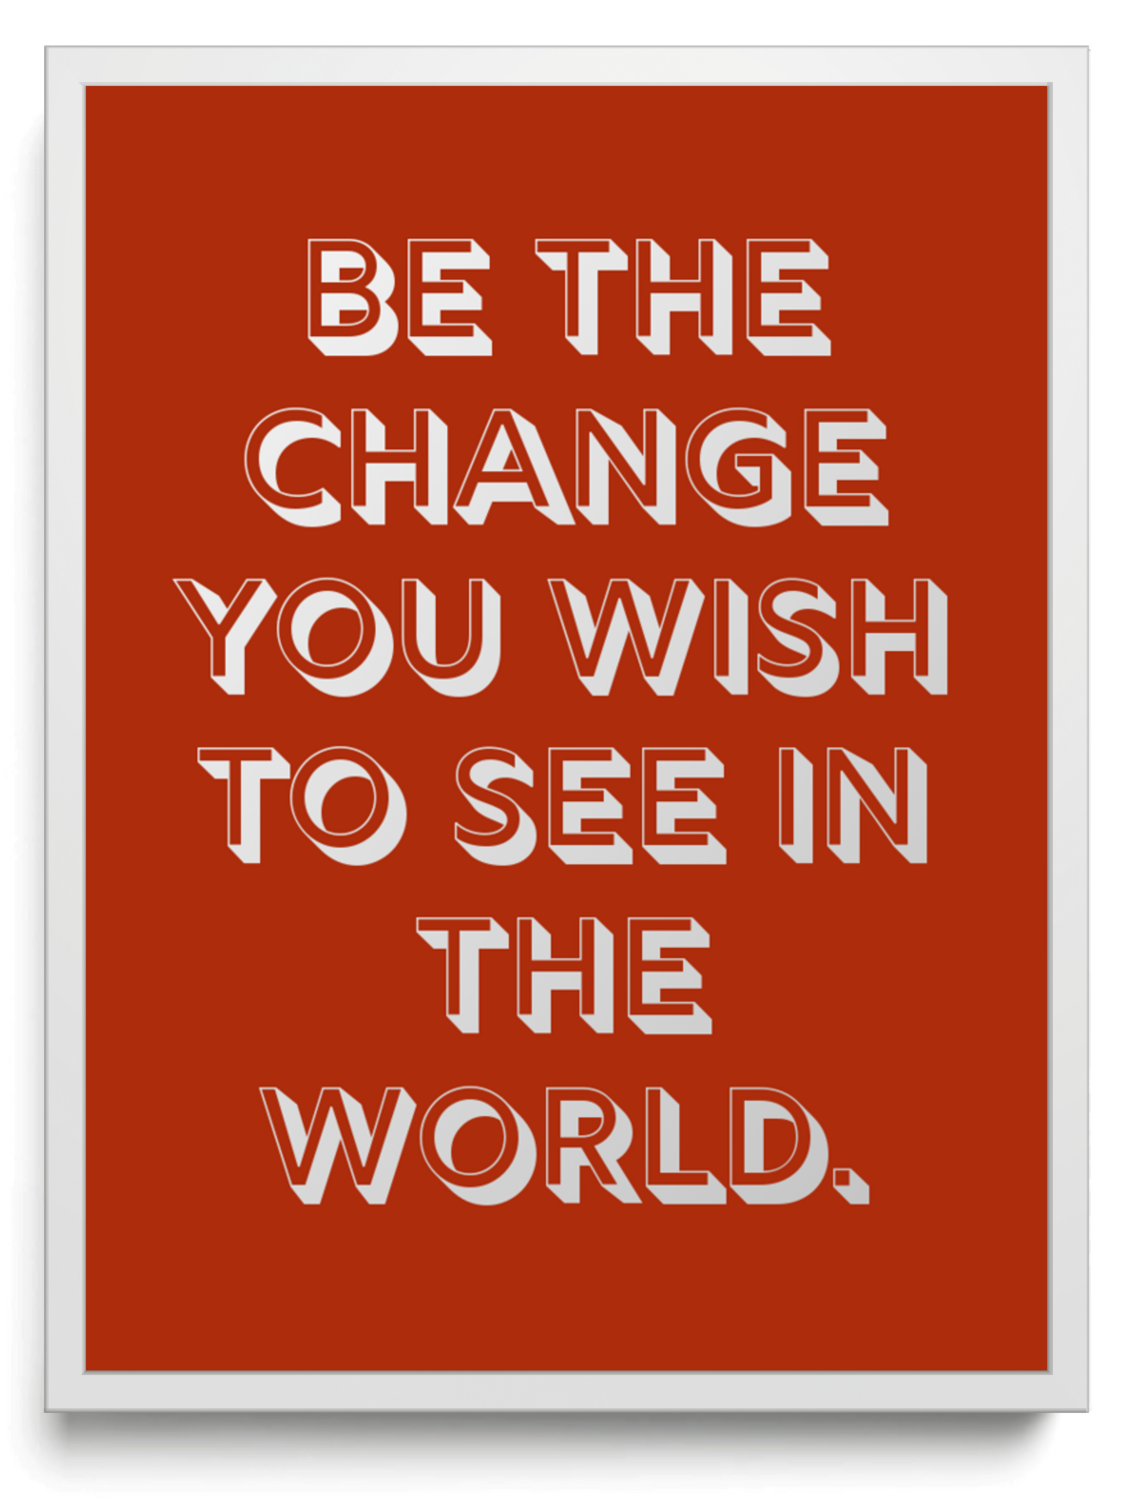 Be the change you wish to see in the world framed typographic print